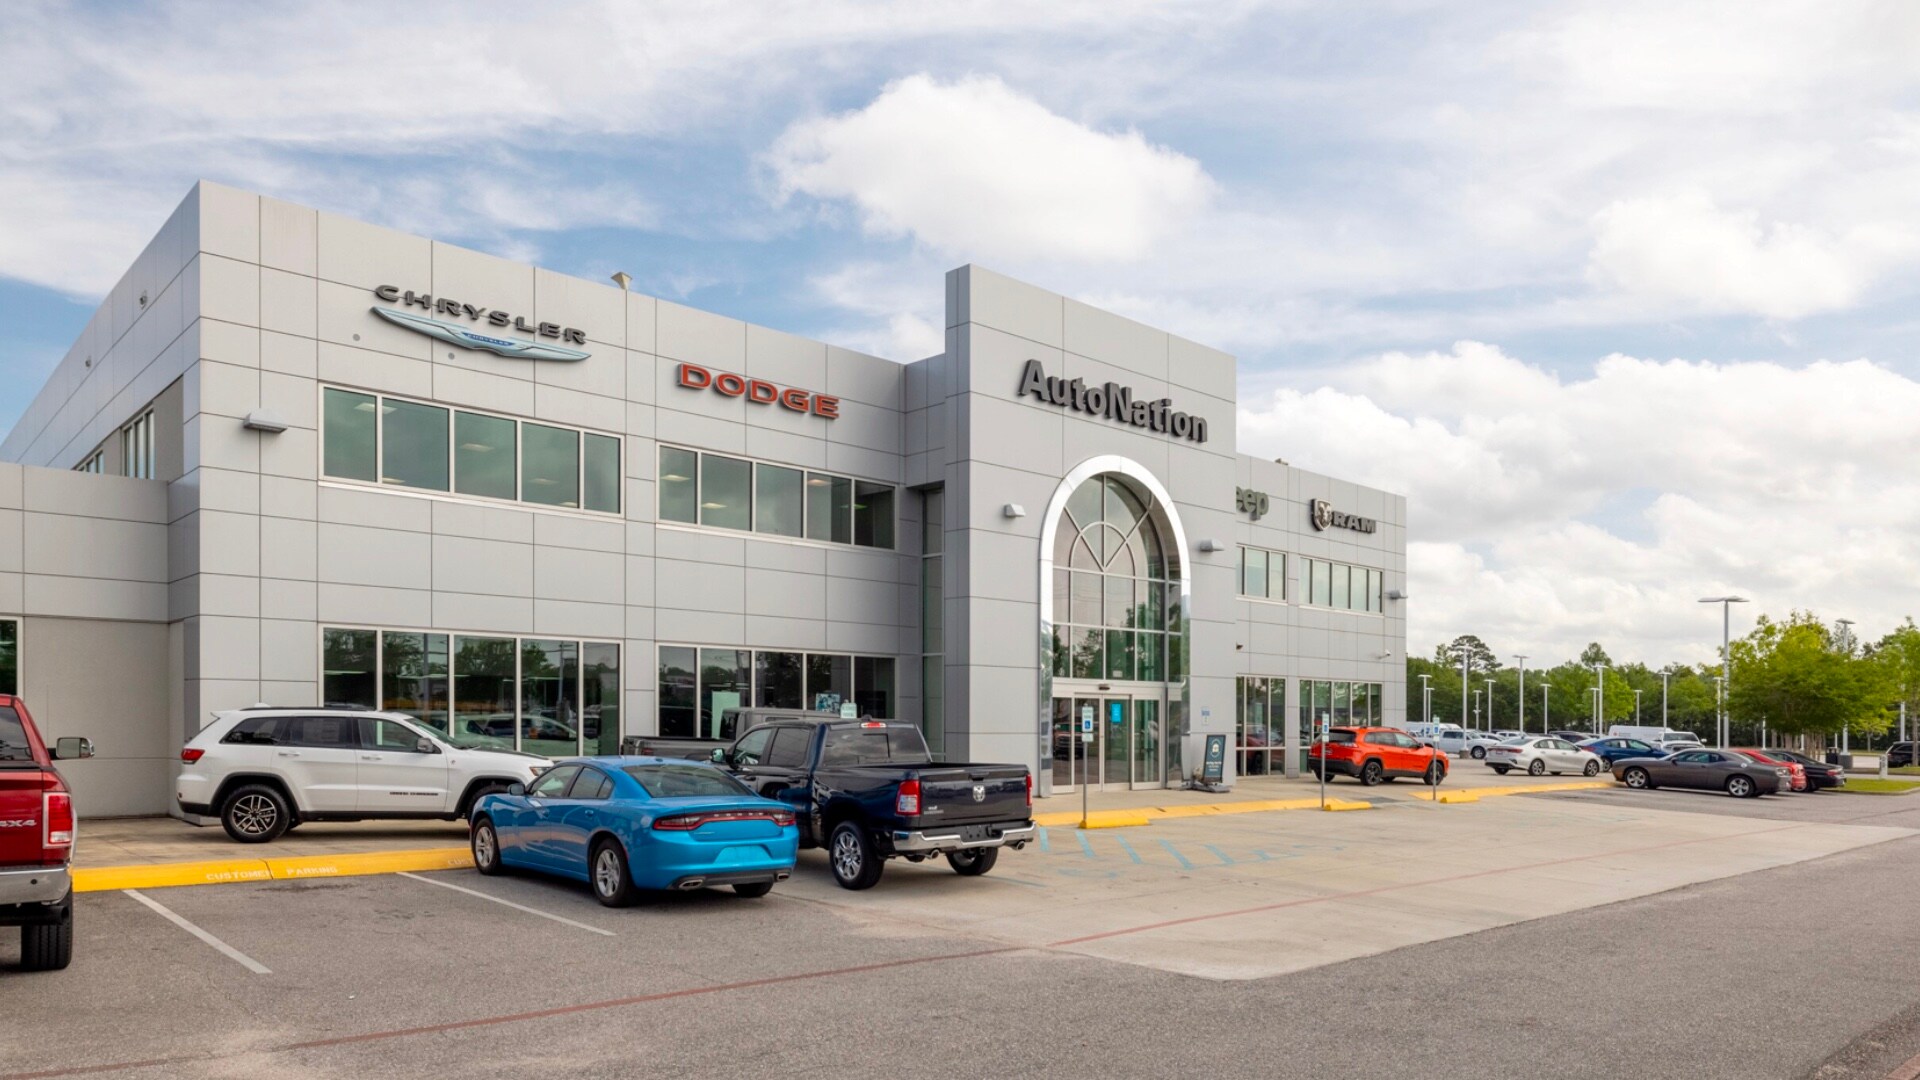 Exterior view of AutoNation Chrysler Dodge Jeep Ram Mobile during the day. There is a cloudy sky and many vehicles parked near the grey building. Trees and greenery are visible around the parking lot.